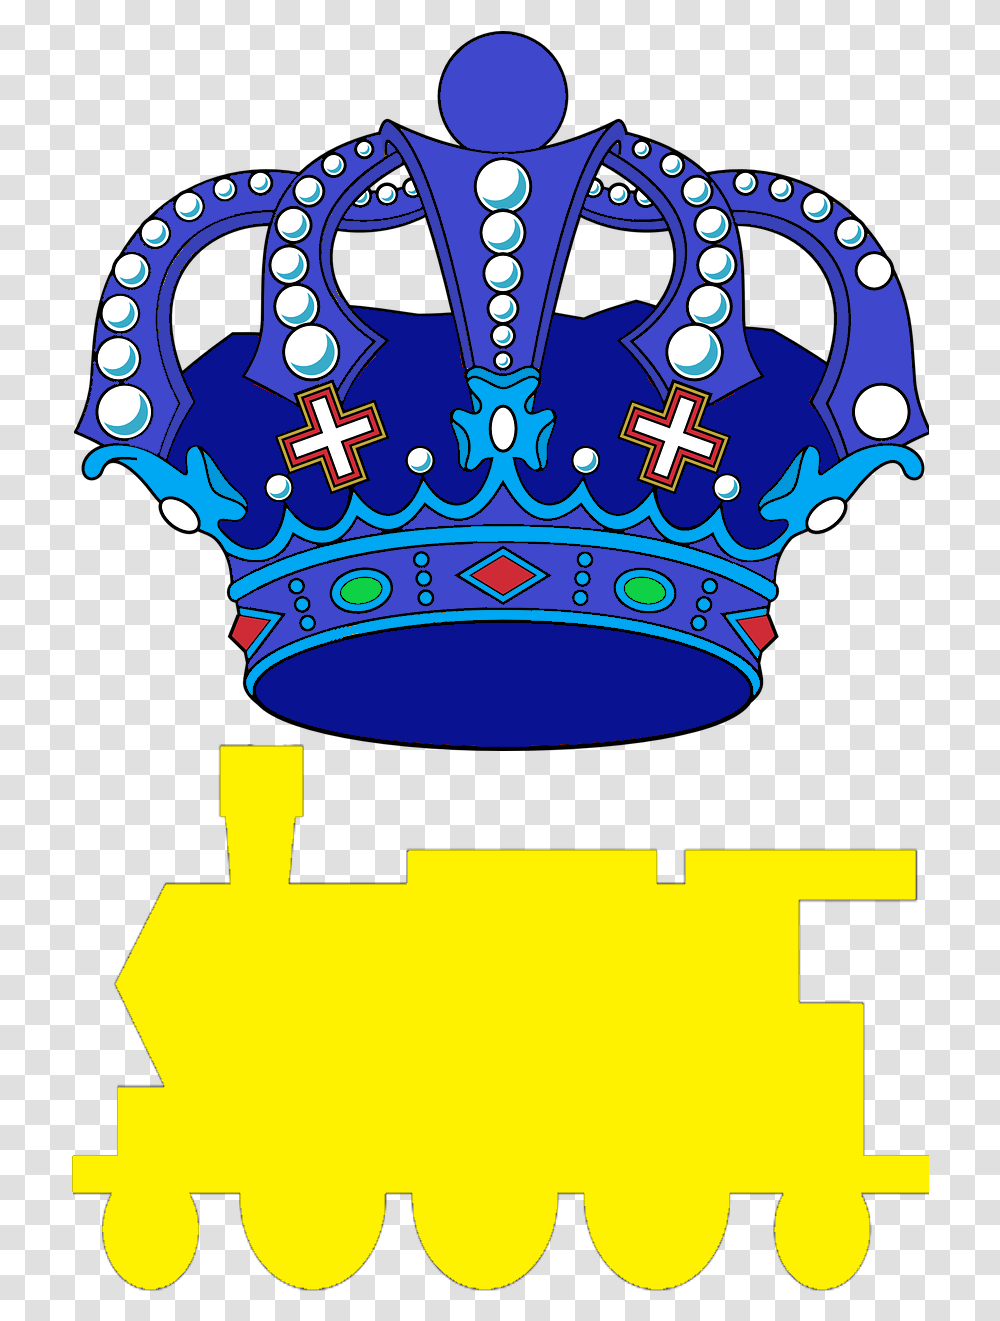 Blue Royal Crown Download Blank Football Logo Template, Accessories, Accessory, Jewelry, Poster Transparent Png